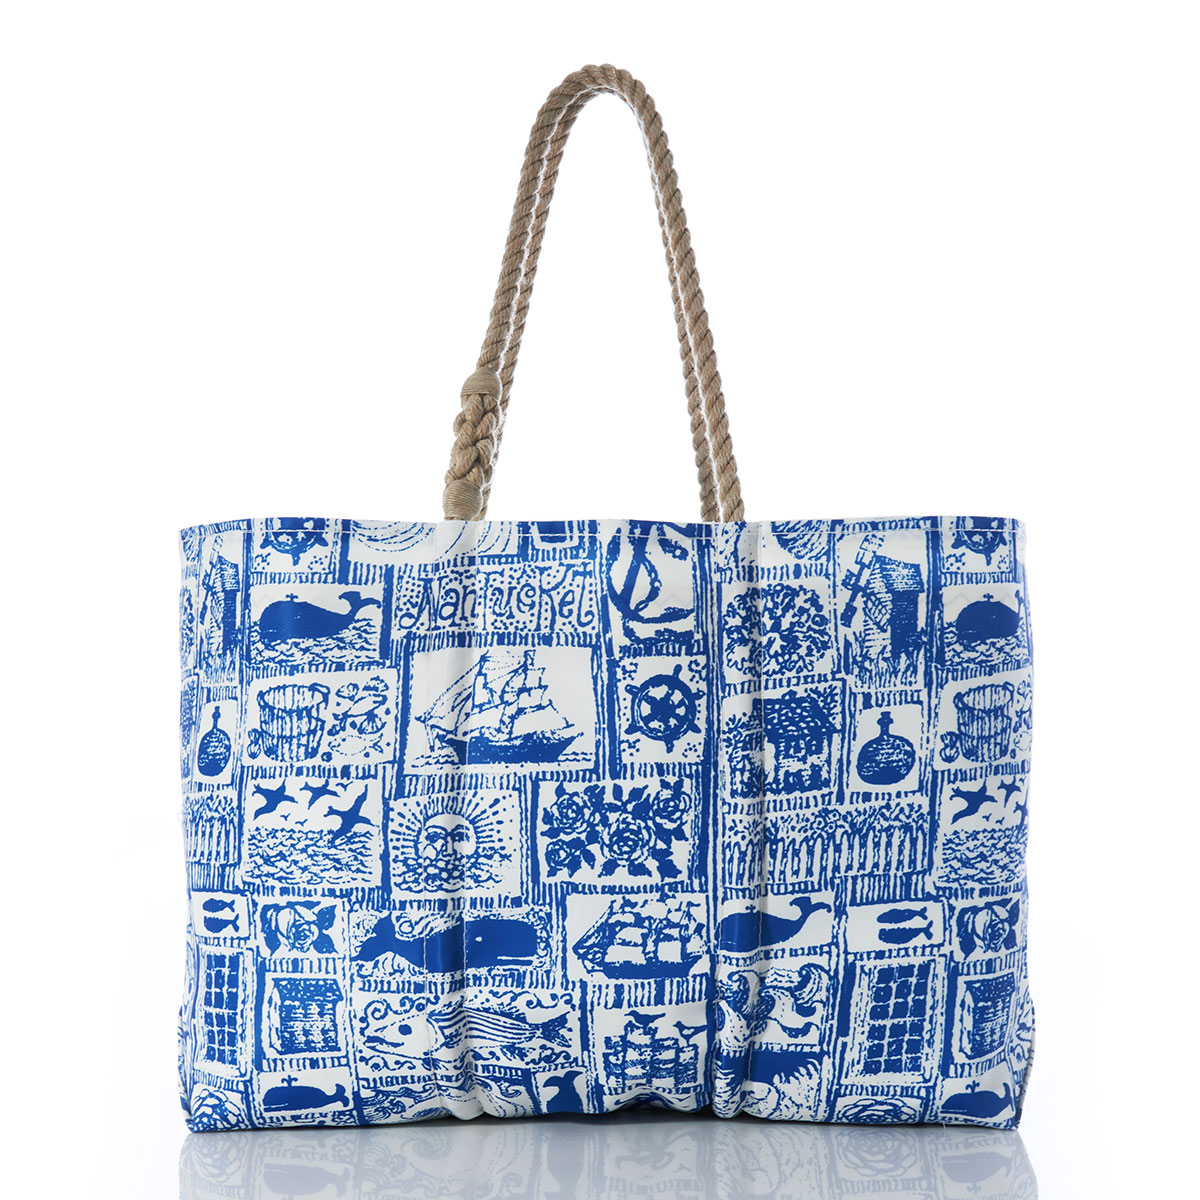 blue squares filled with various nautical imagery printed on recycled sail cloth large tote with hemp rope handles